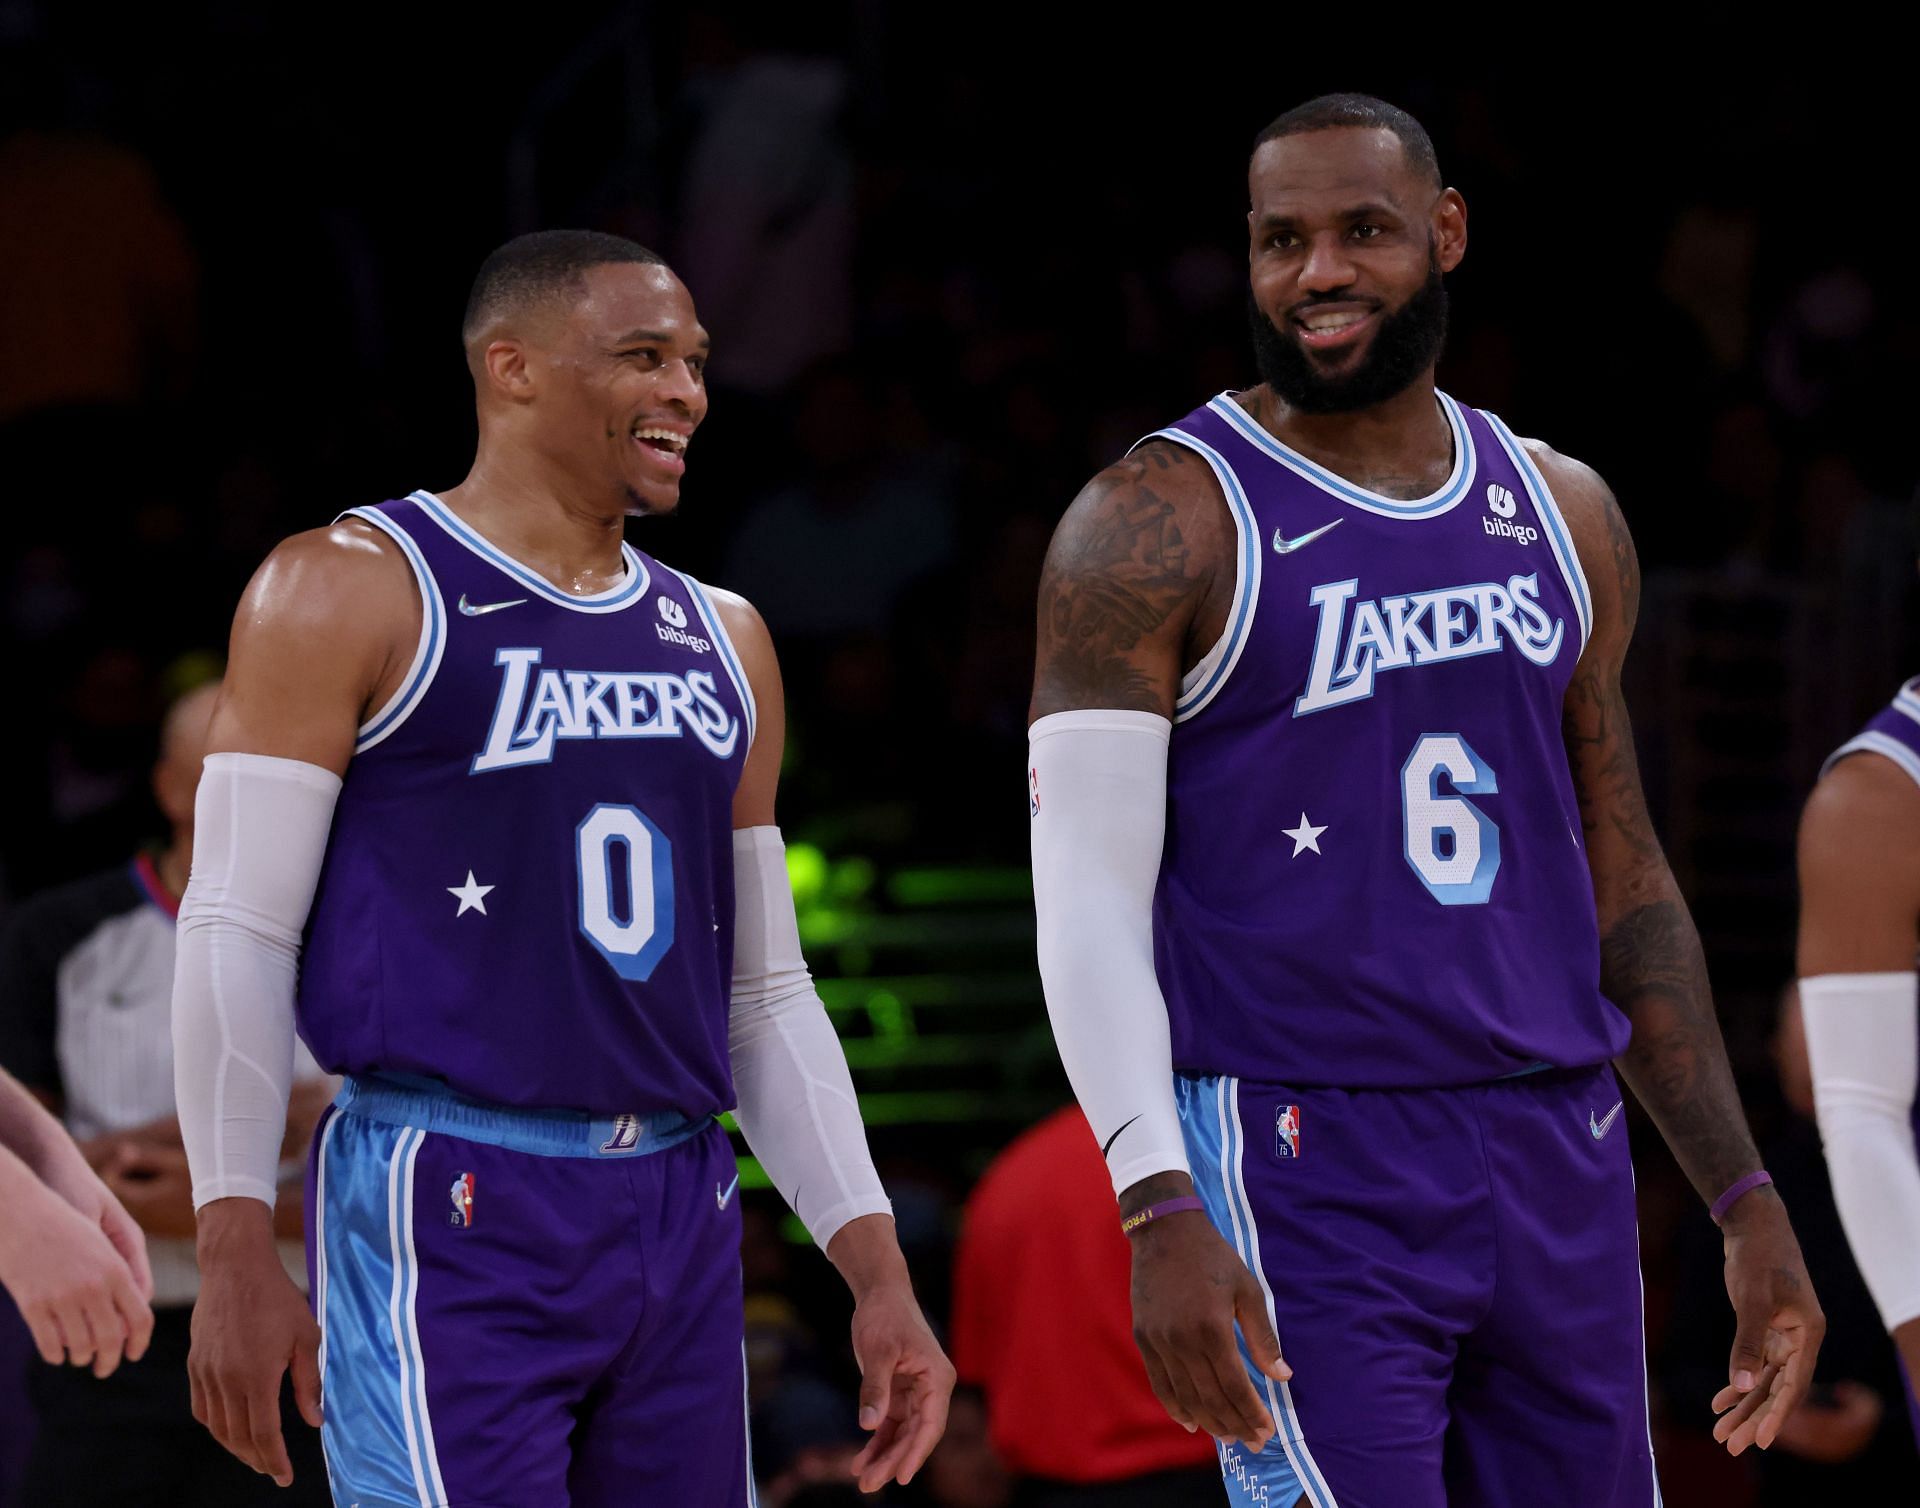 Russell Westbrook (left) and LeBron James of the LA Lakers.